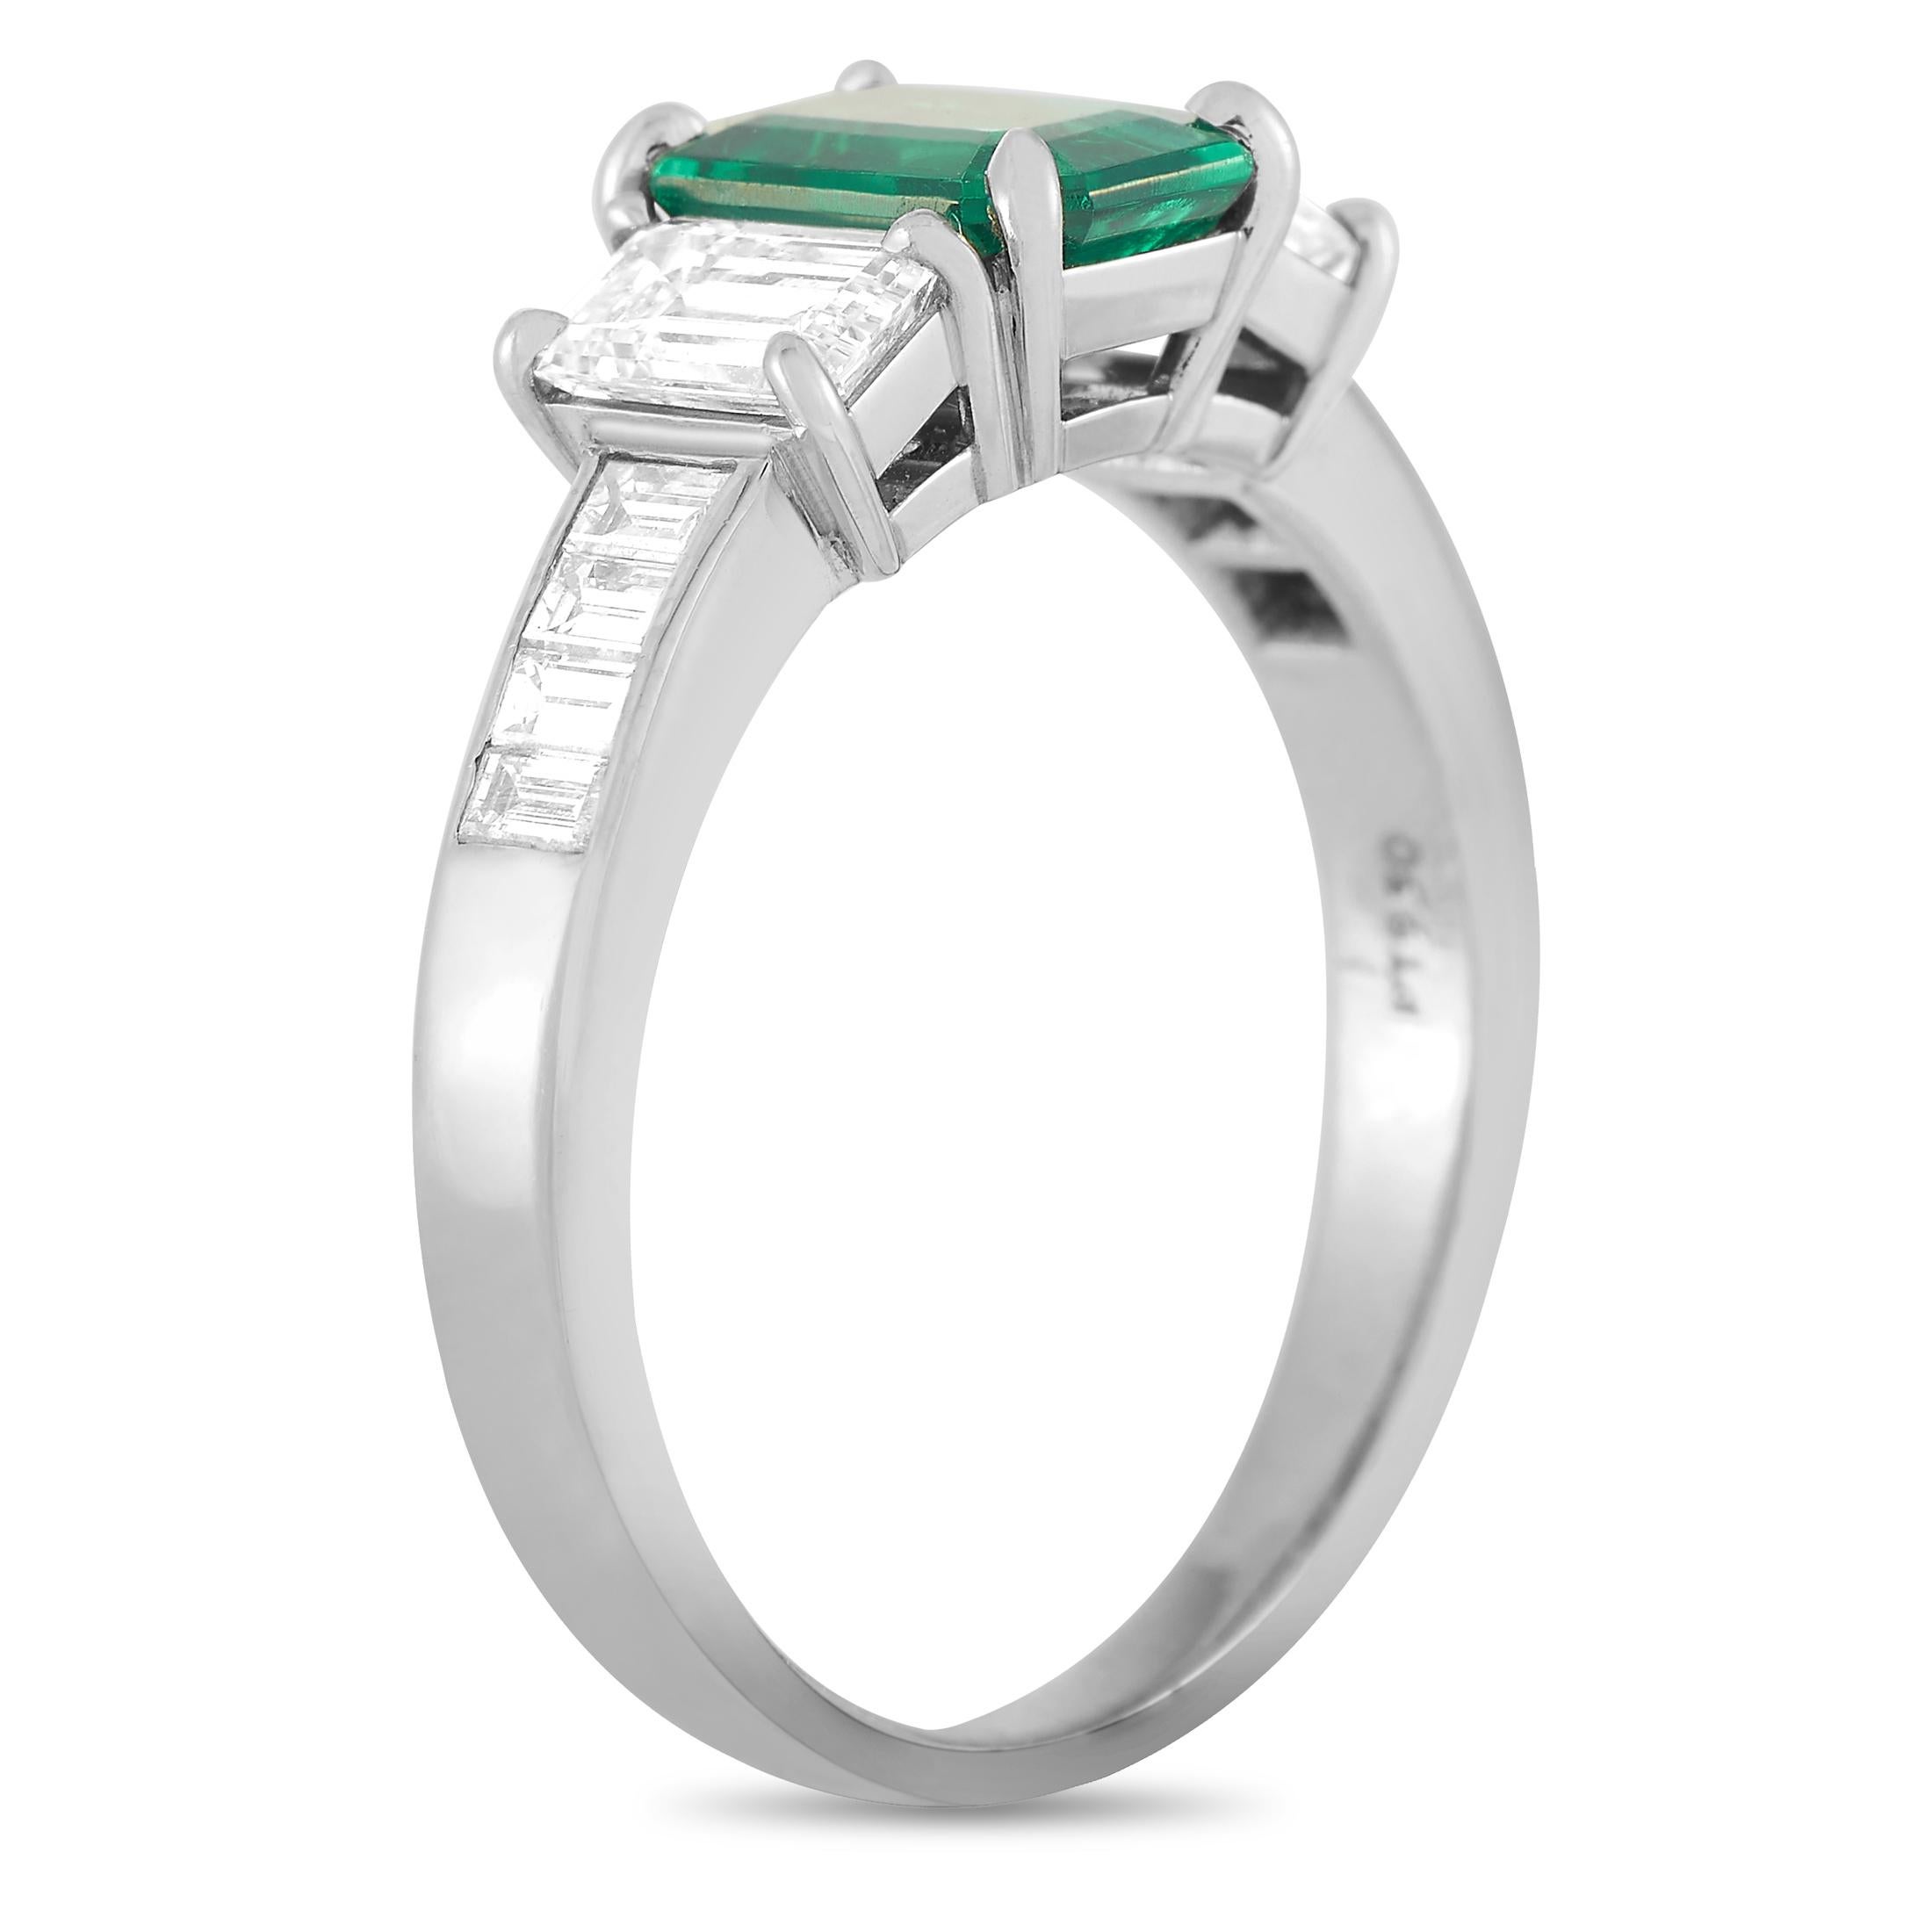 This Tiffany & Co. ring is made of platinum and weighs 5.6 grams. It boasts band thickness of 3 mm and top height of 6 mm, while top dimensions measure 8 by 14 mm. The ring is set with an emerald that weighs approximately 1.75 carats and with